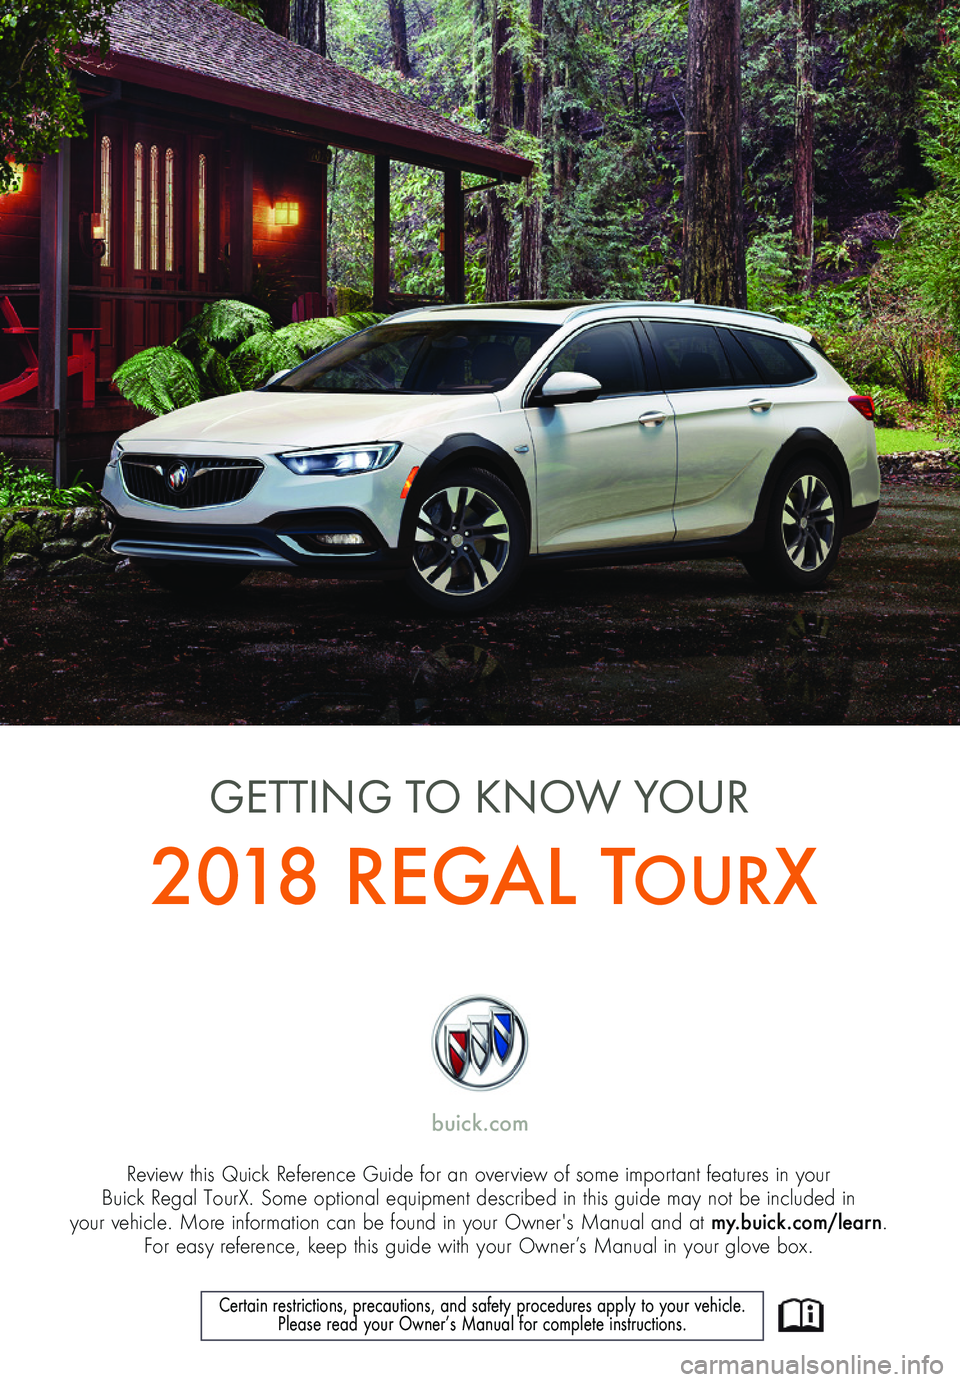 BUICK REGAL TOURX 2018  Get To Know Guide 1
Review this Quick Reference Guide for an overview of some important features in your  Buick Regal TourX. Some optional equipment described in this guide may not be included in  your vehicle. More in